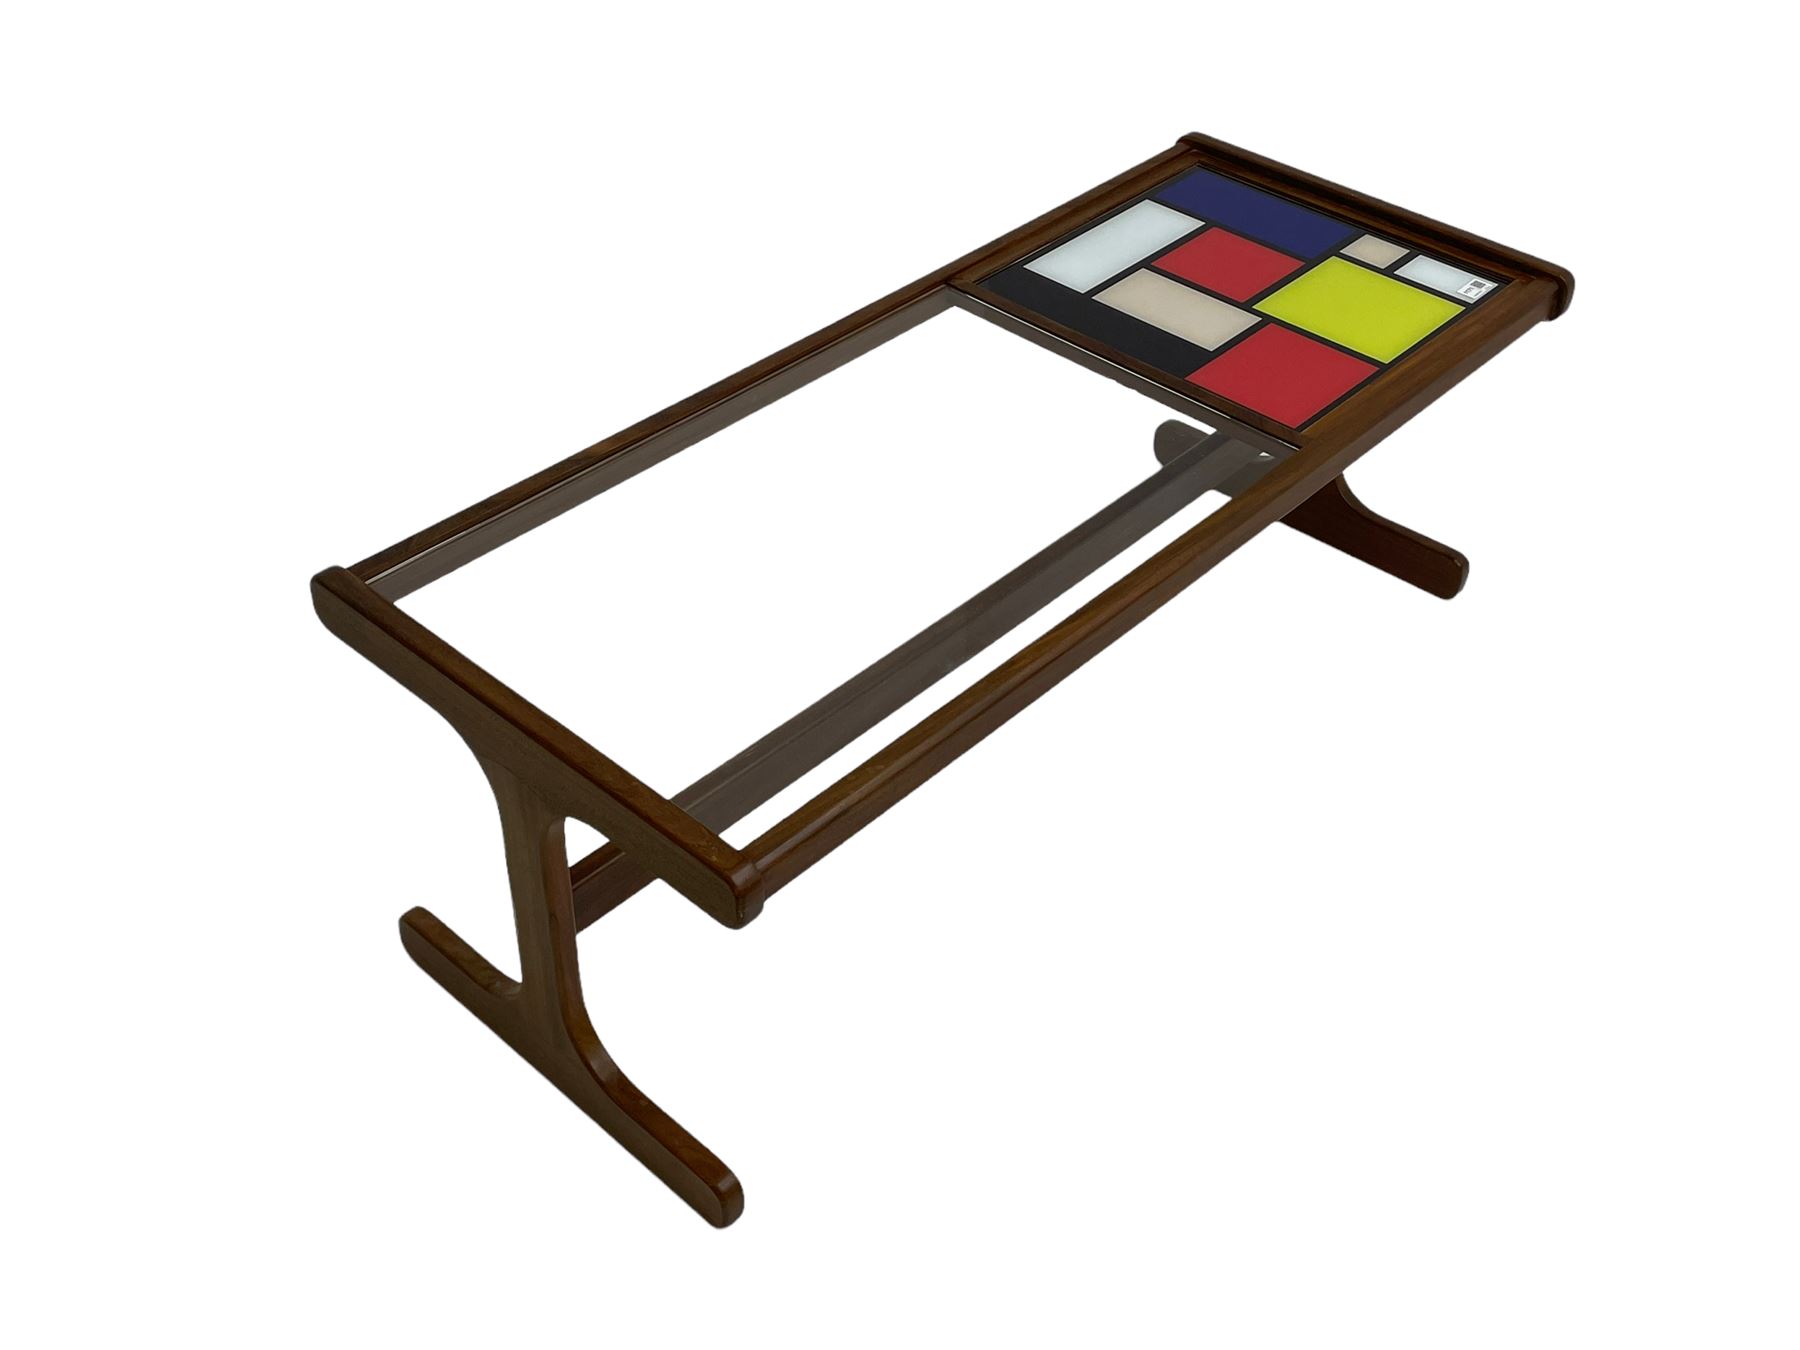 G-Plan - rectangular teak coffee table with Mondrian style inset and glass top - Image 6 of 6